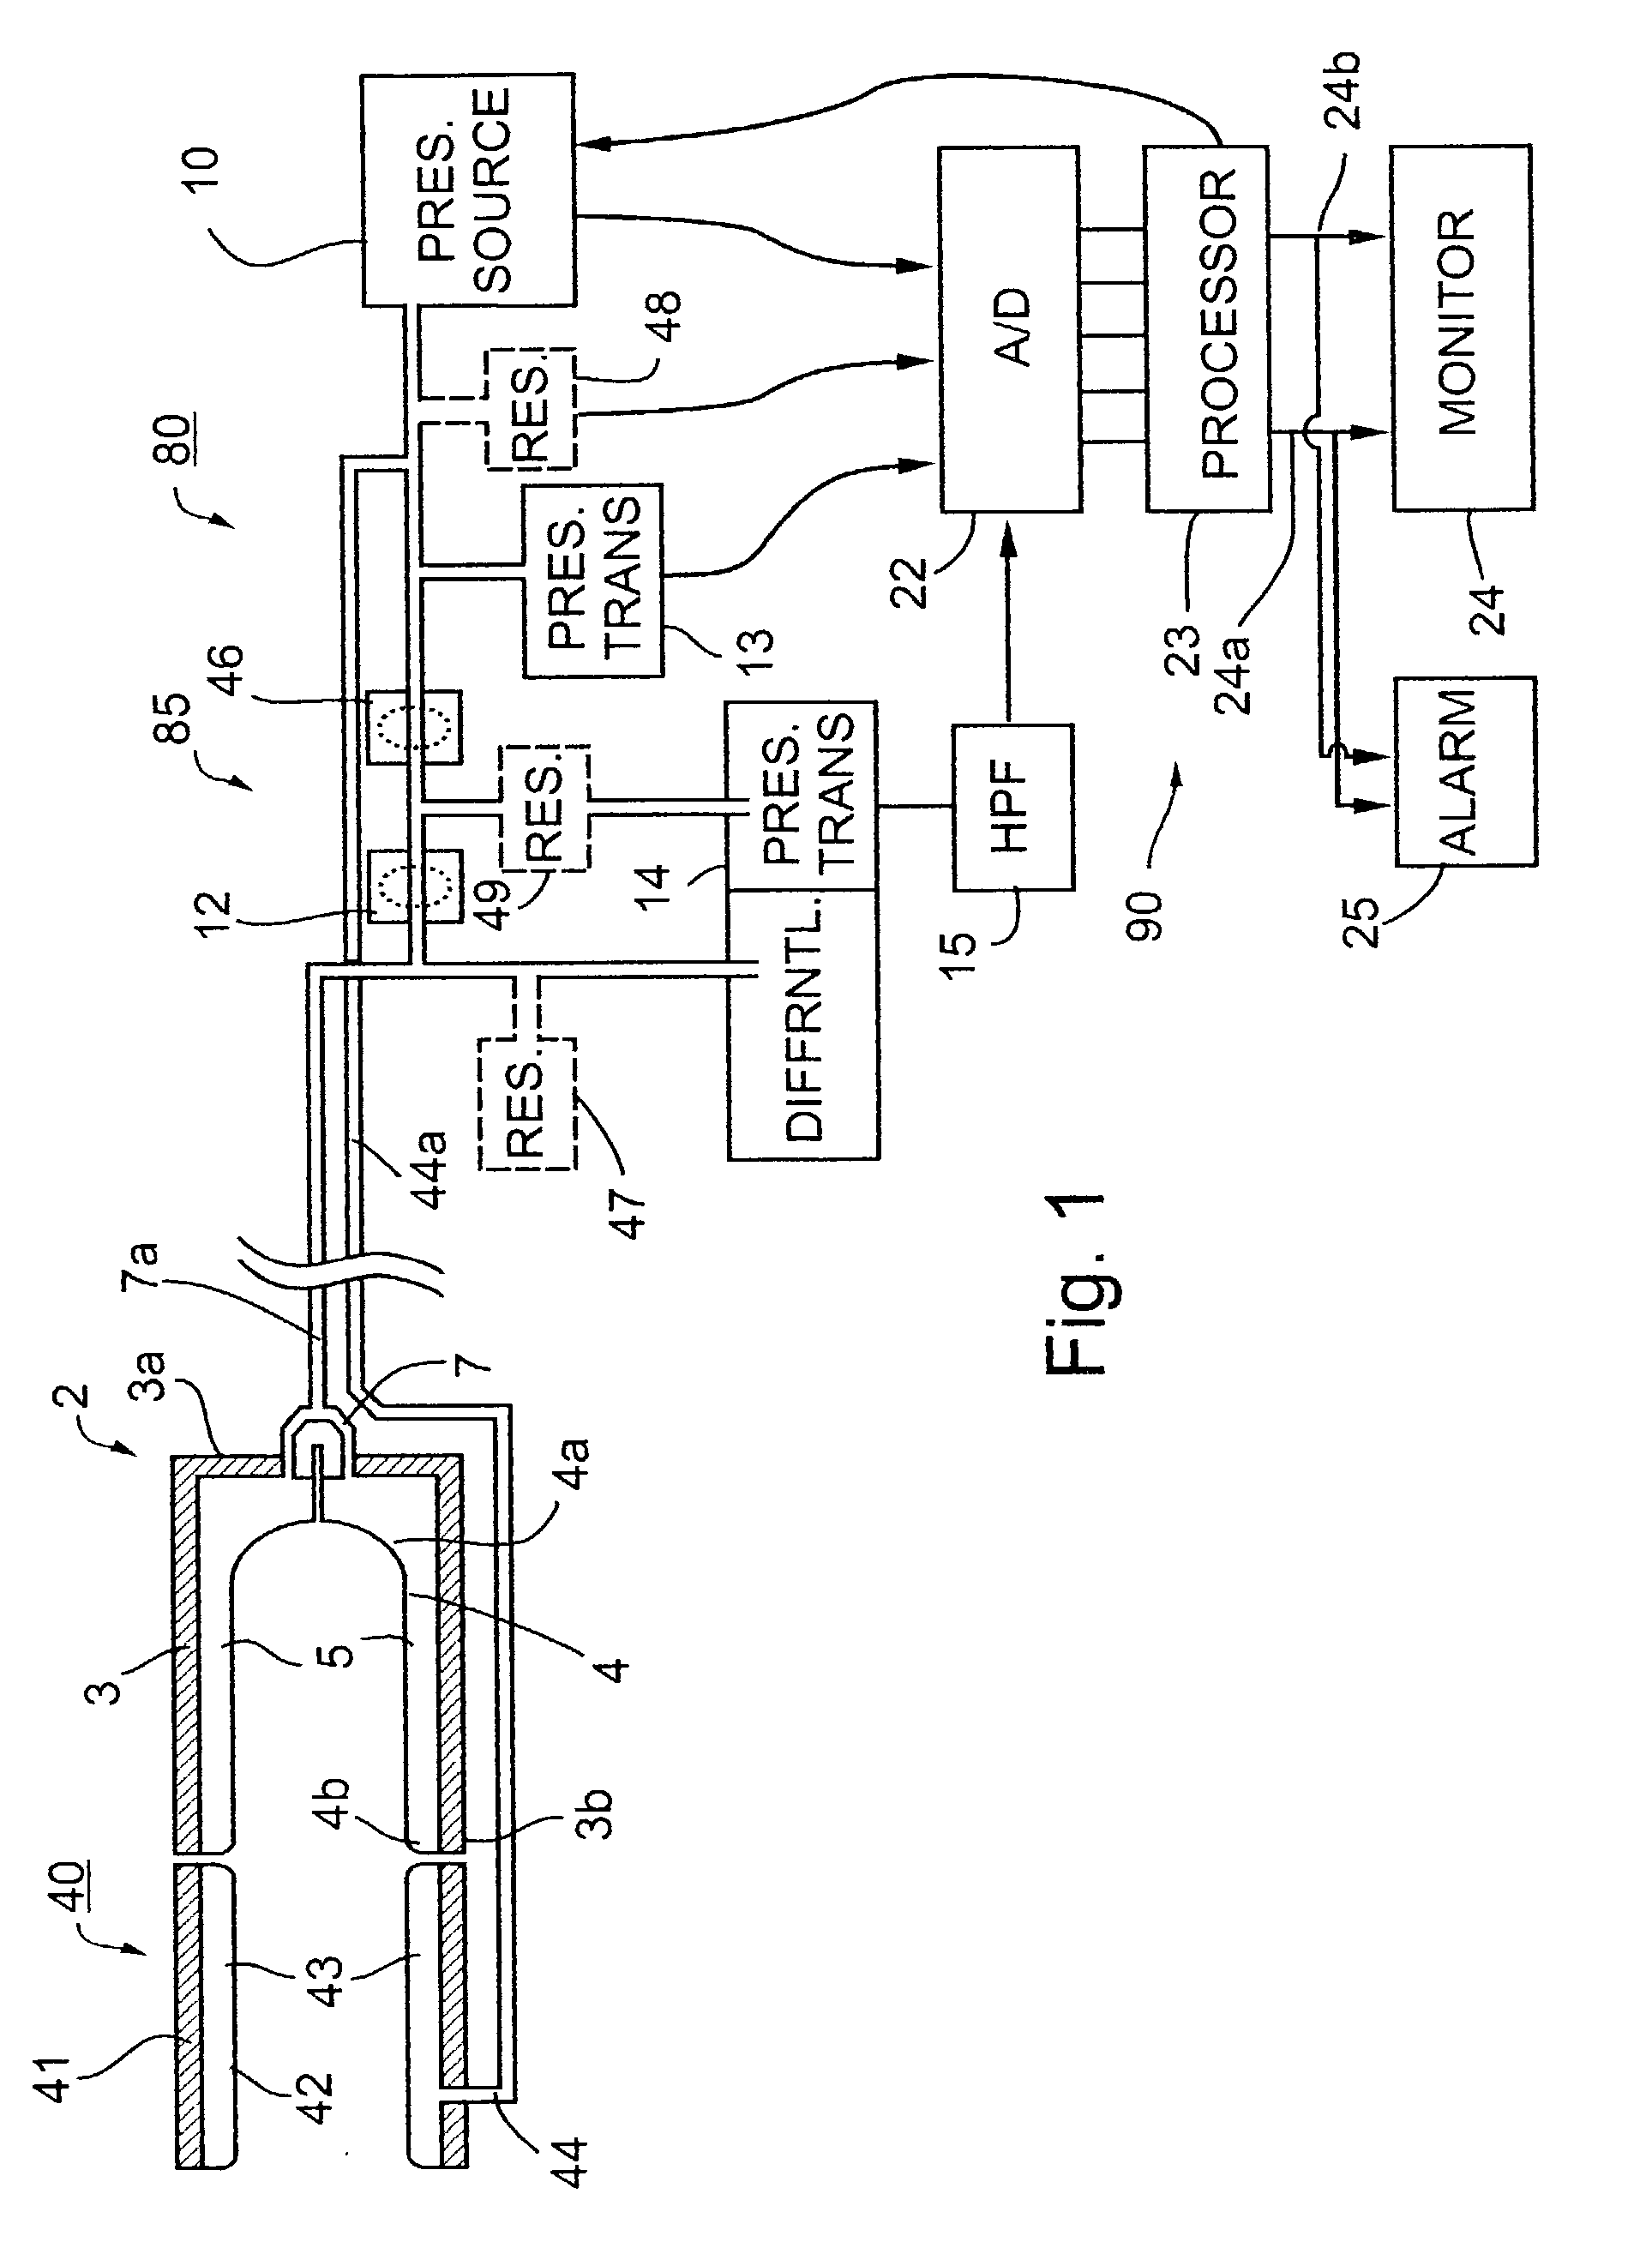 Method and apparatus for the non-invasive detection of particular sleep-state conditions by monitoring the peripheral vascular system